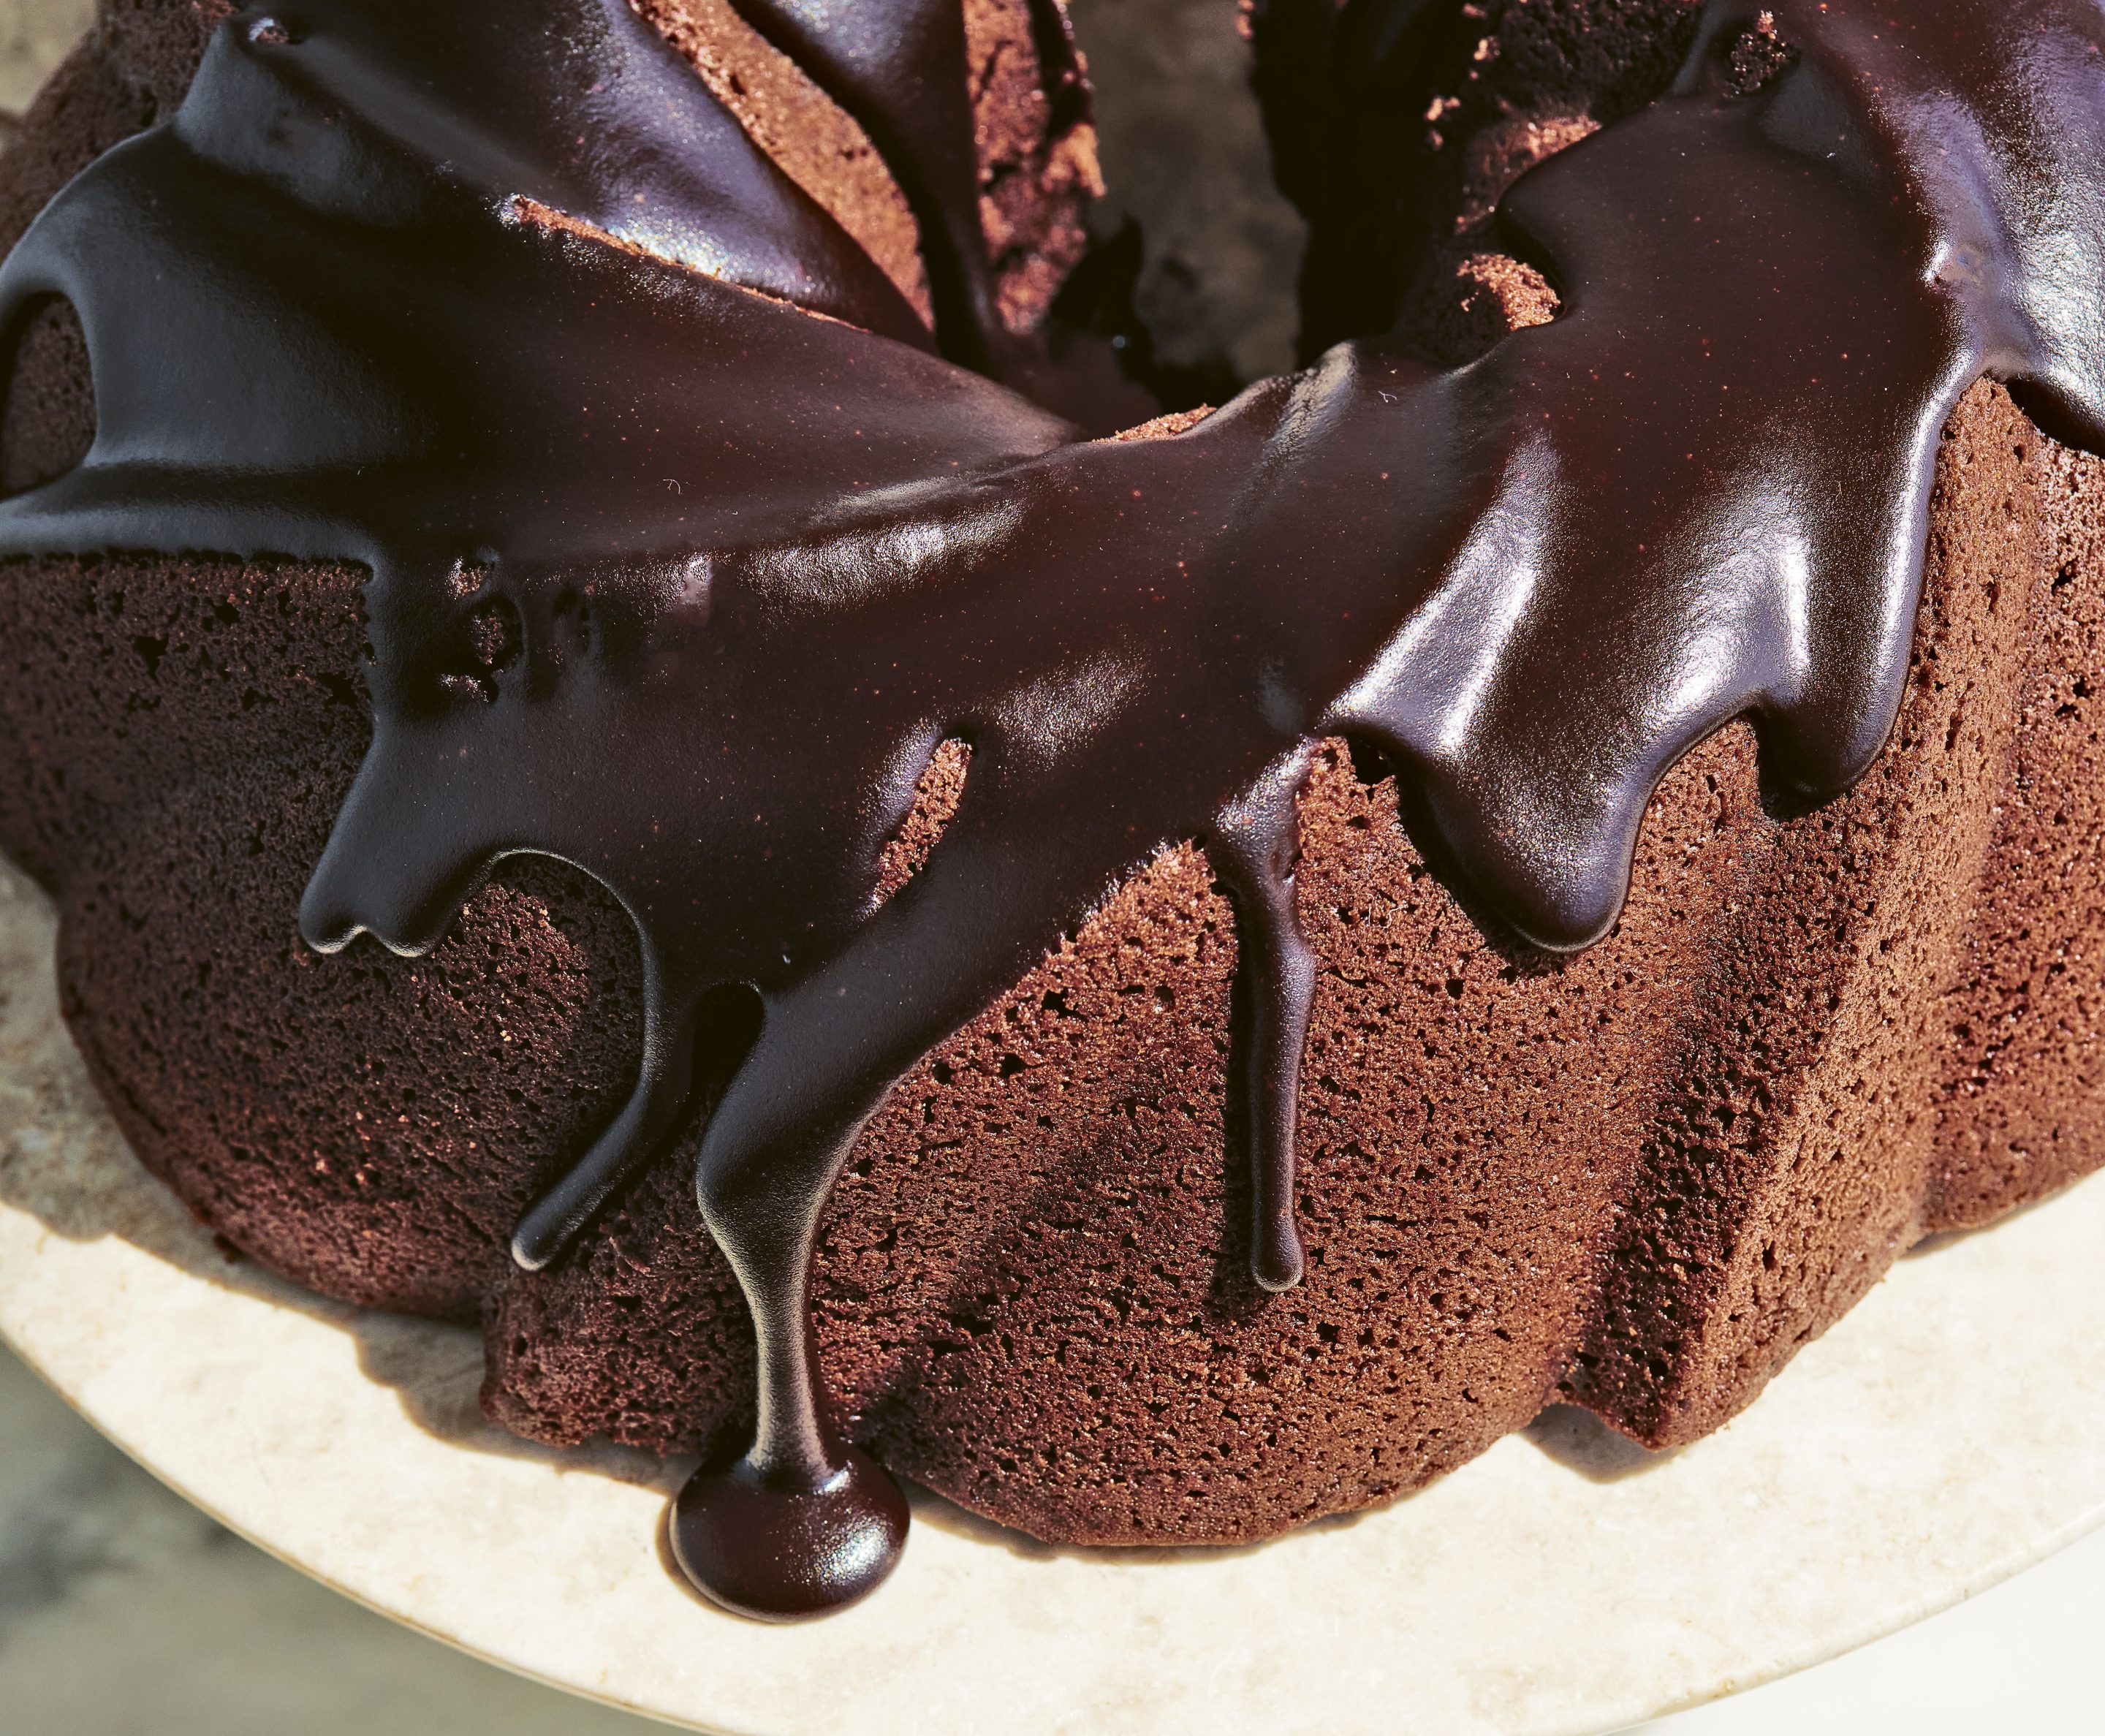 Chocolate cake with chocolate frosting